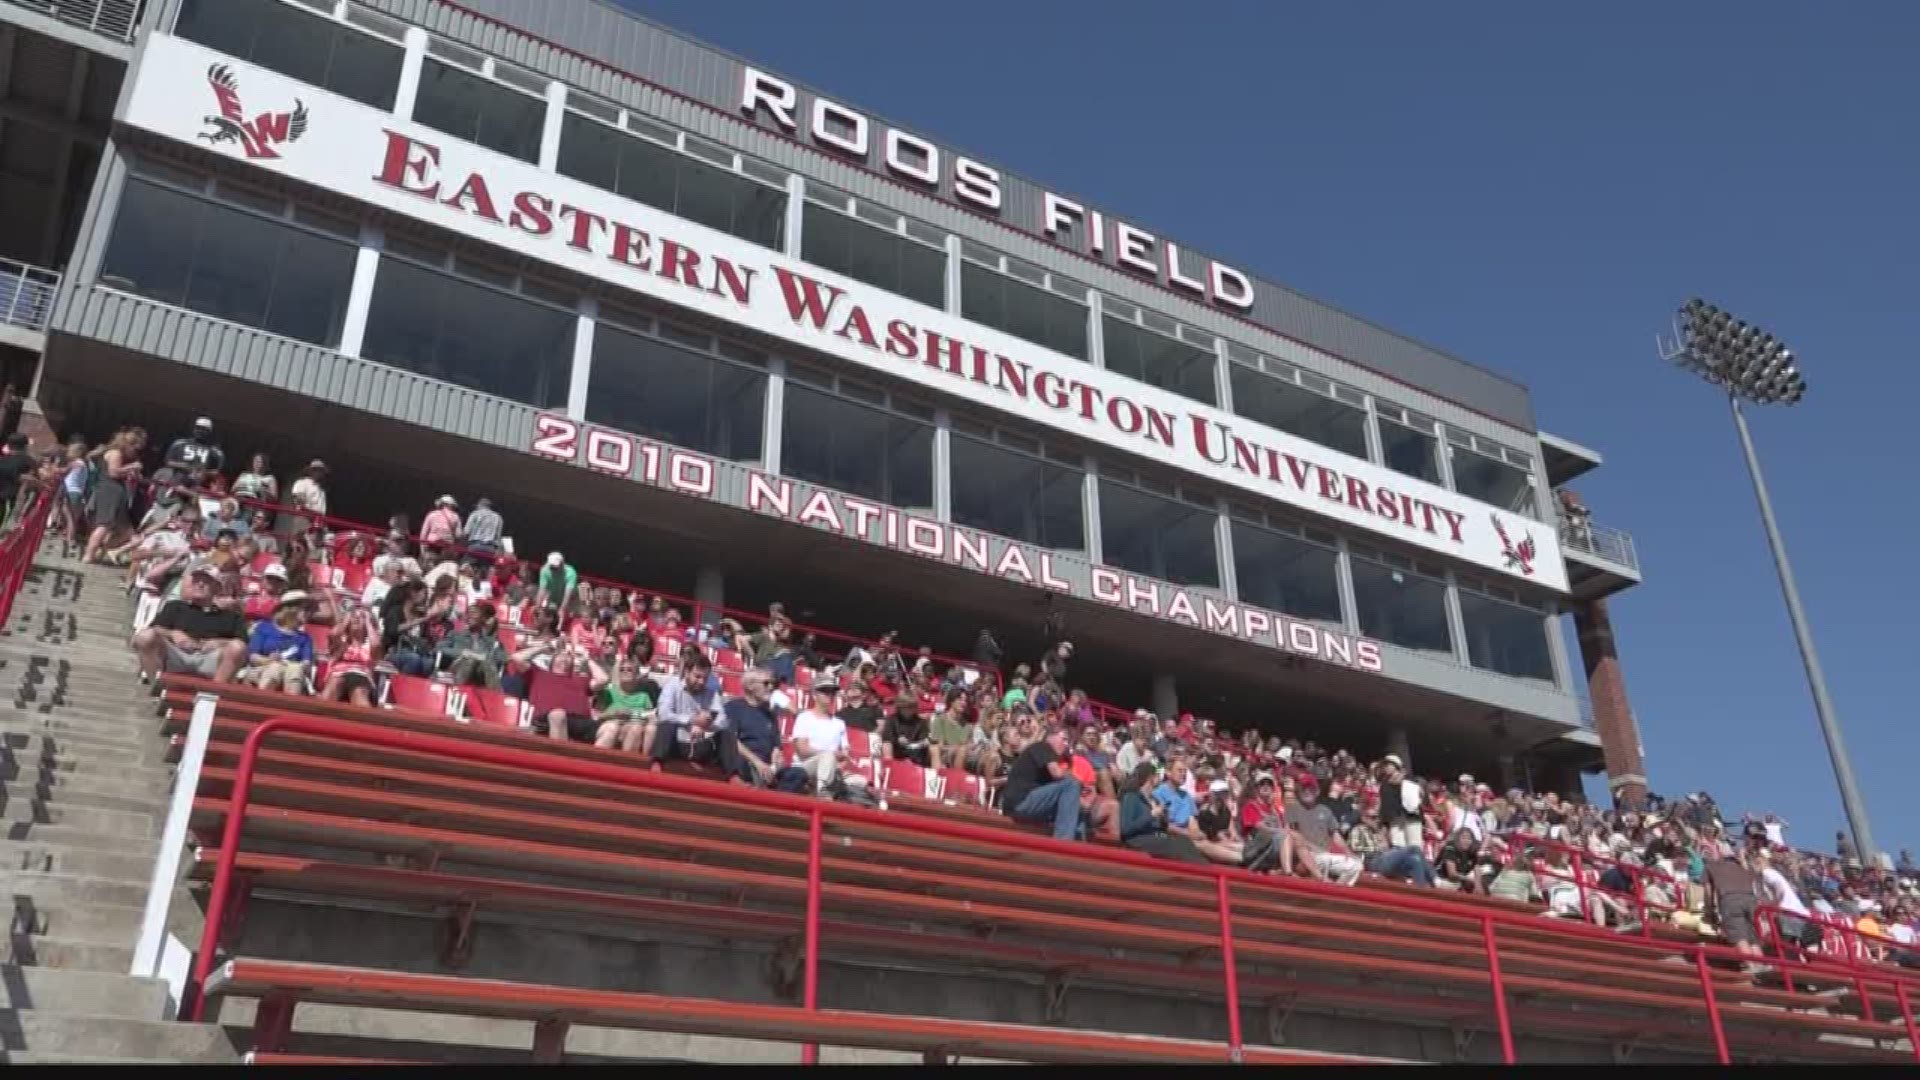 Eclipse viewing party at Eastern Washington University